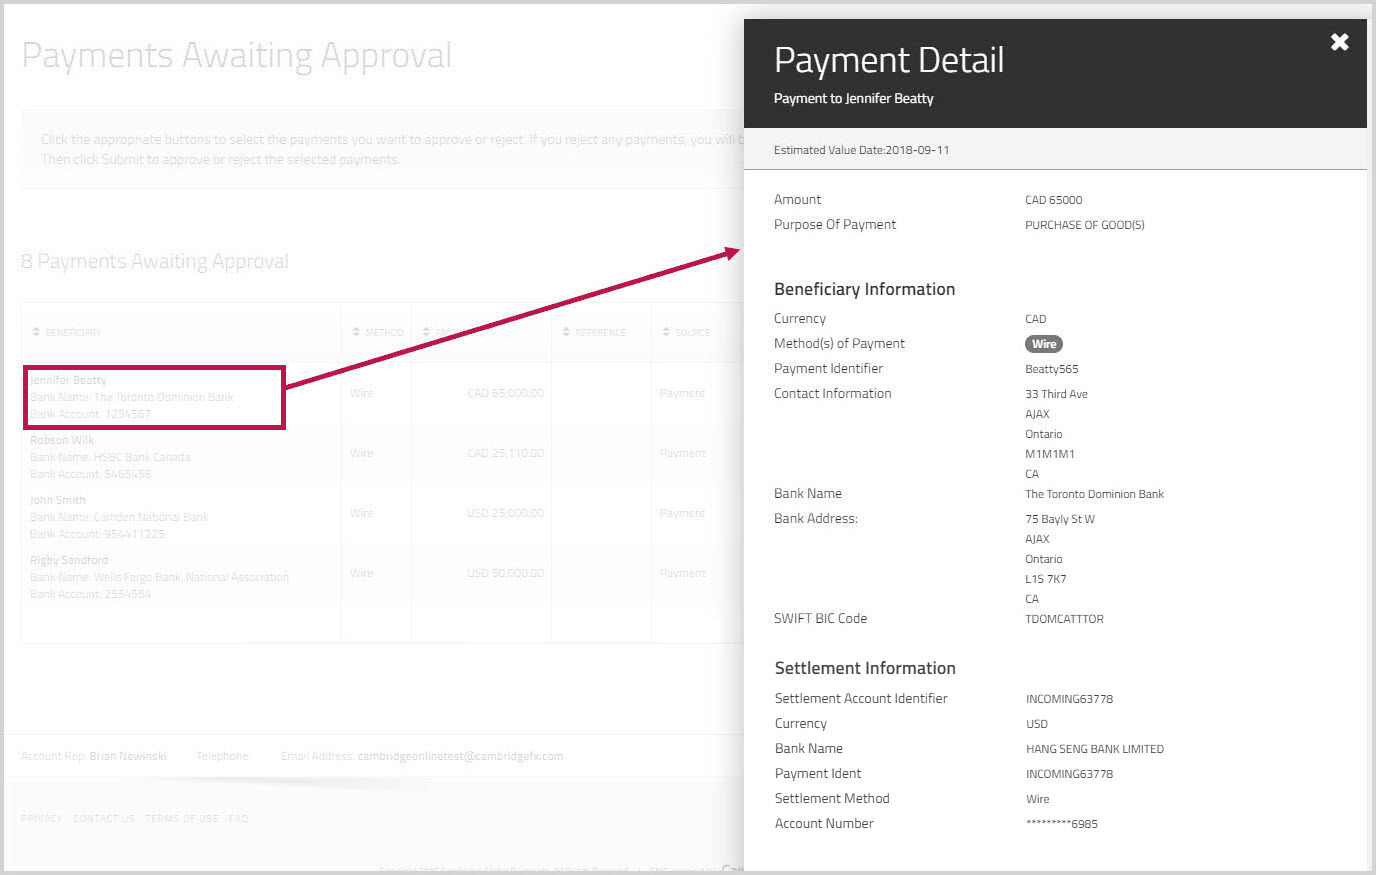 Payment details for payment awaiting approval